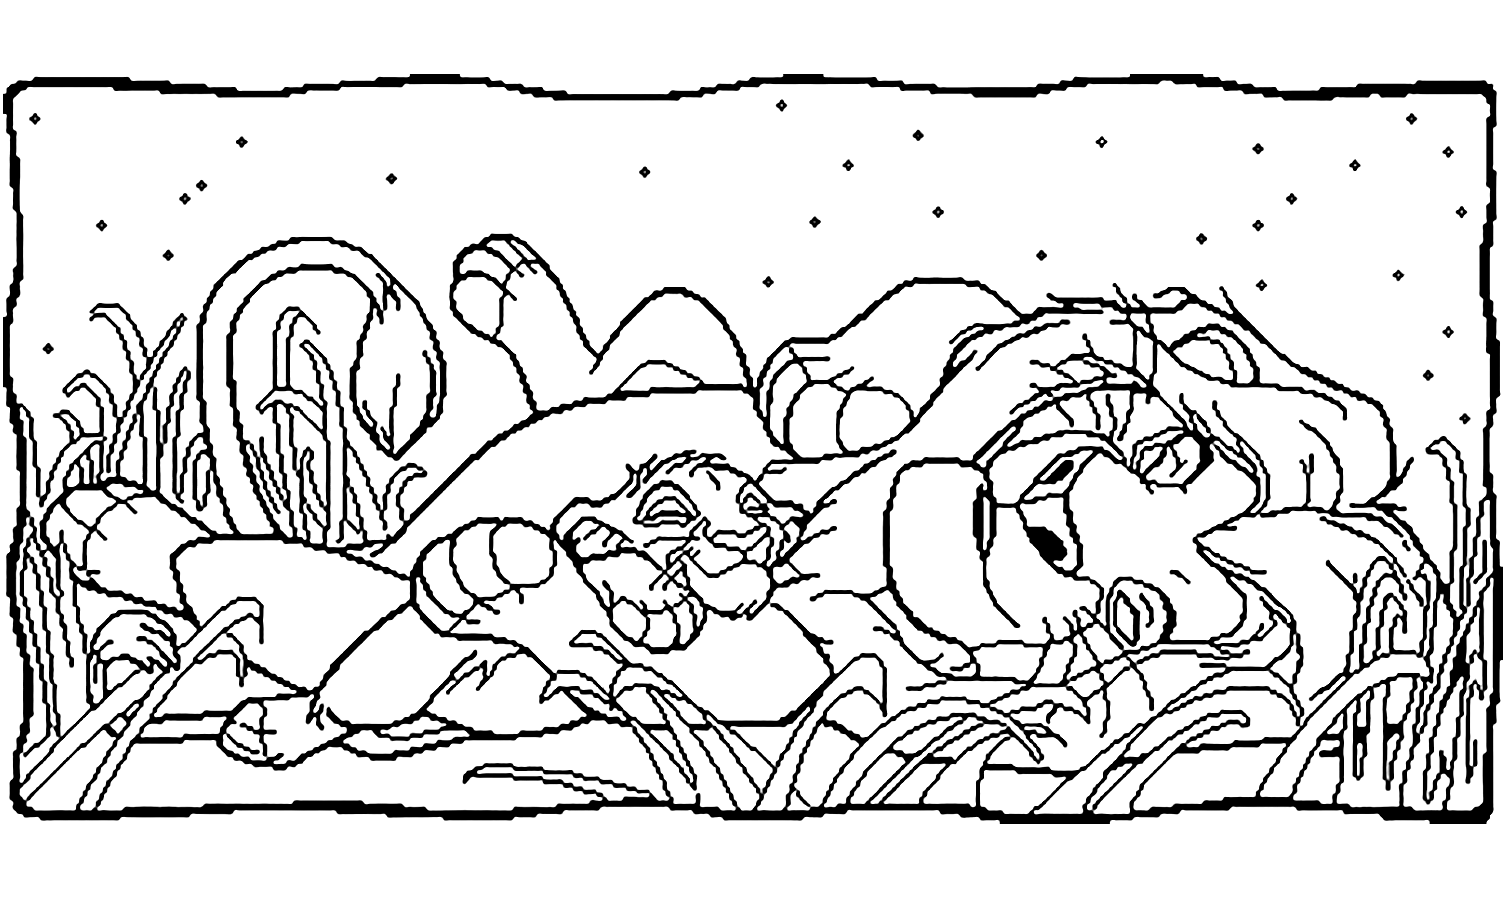 Simple Lion King coloring page - The Lion King Kids Coloring Pages